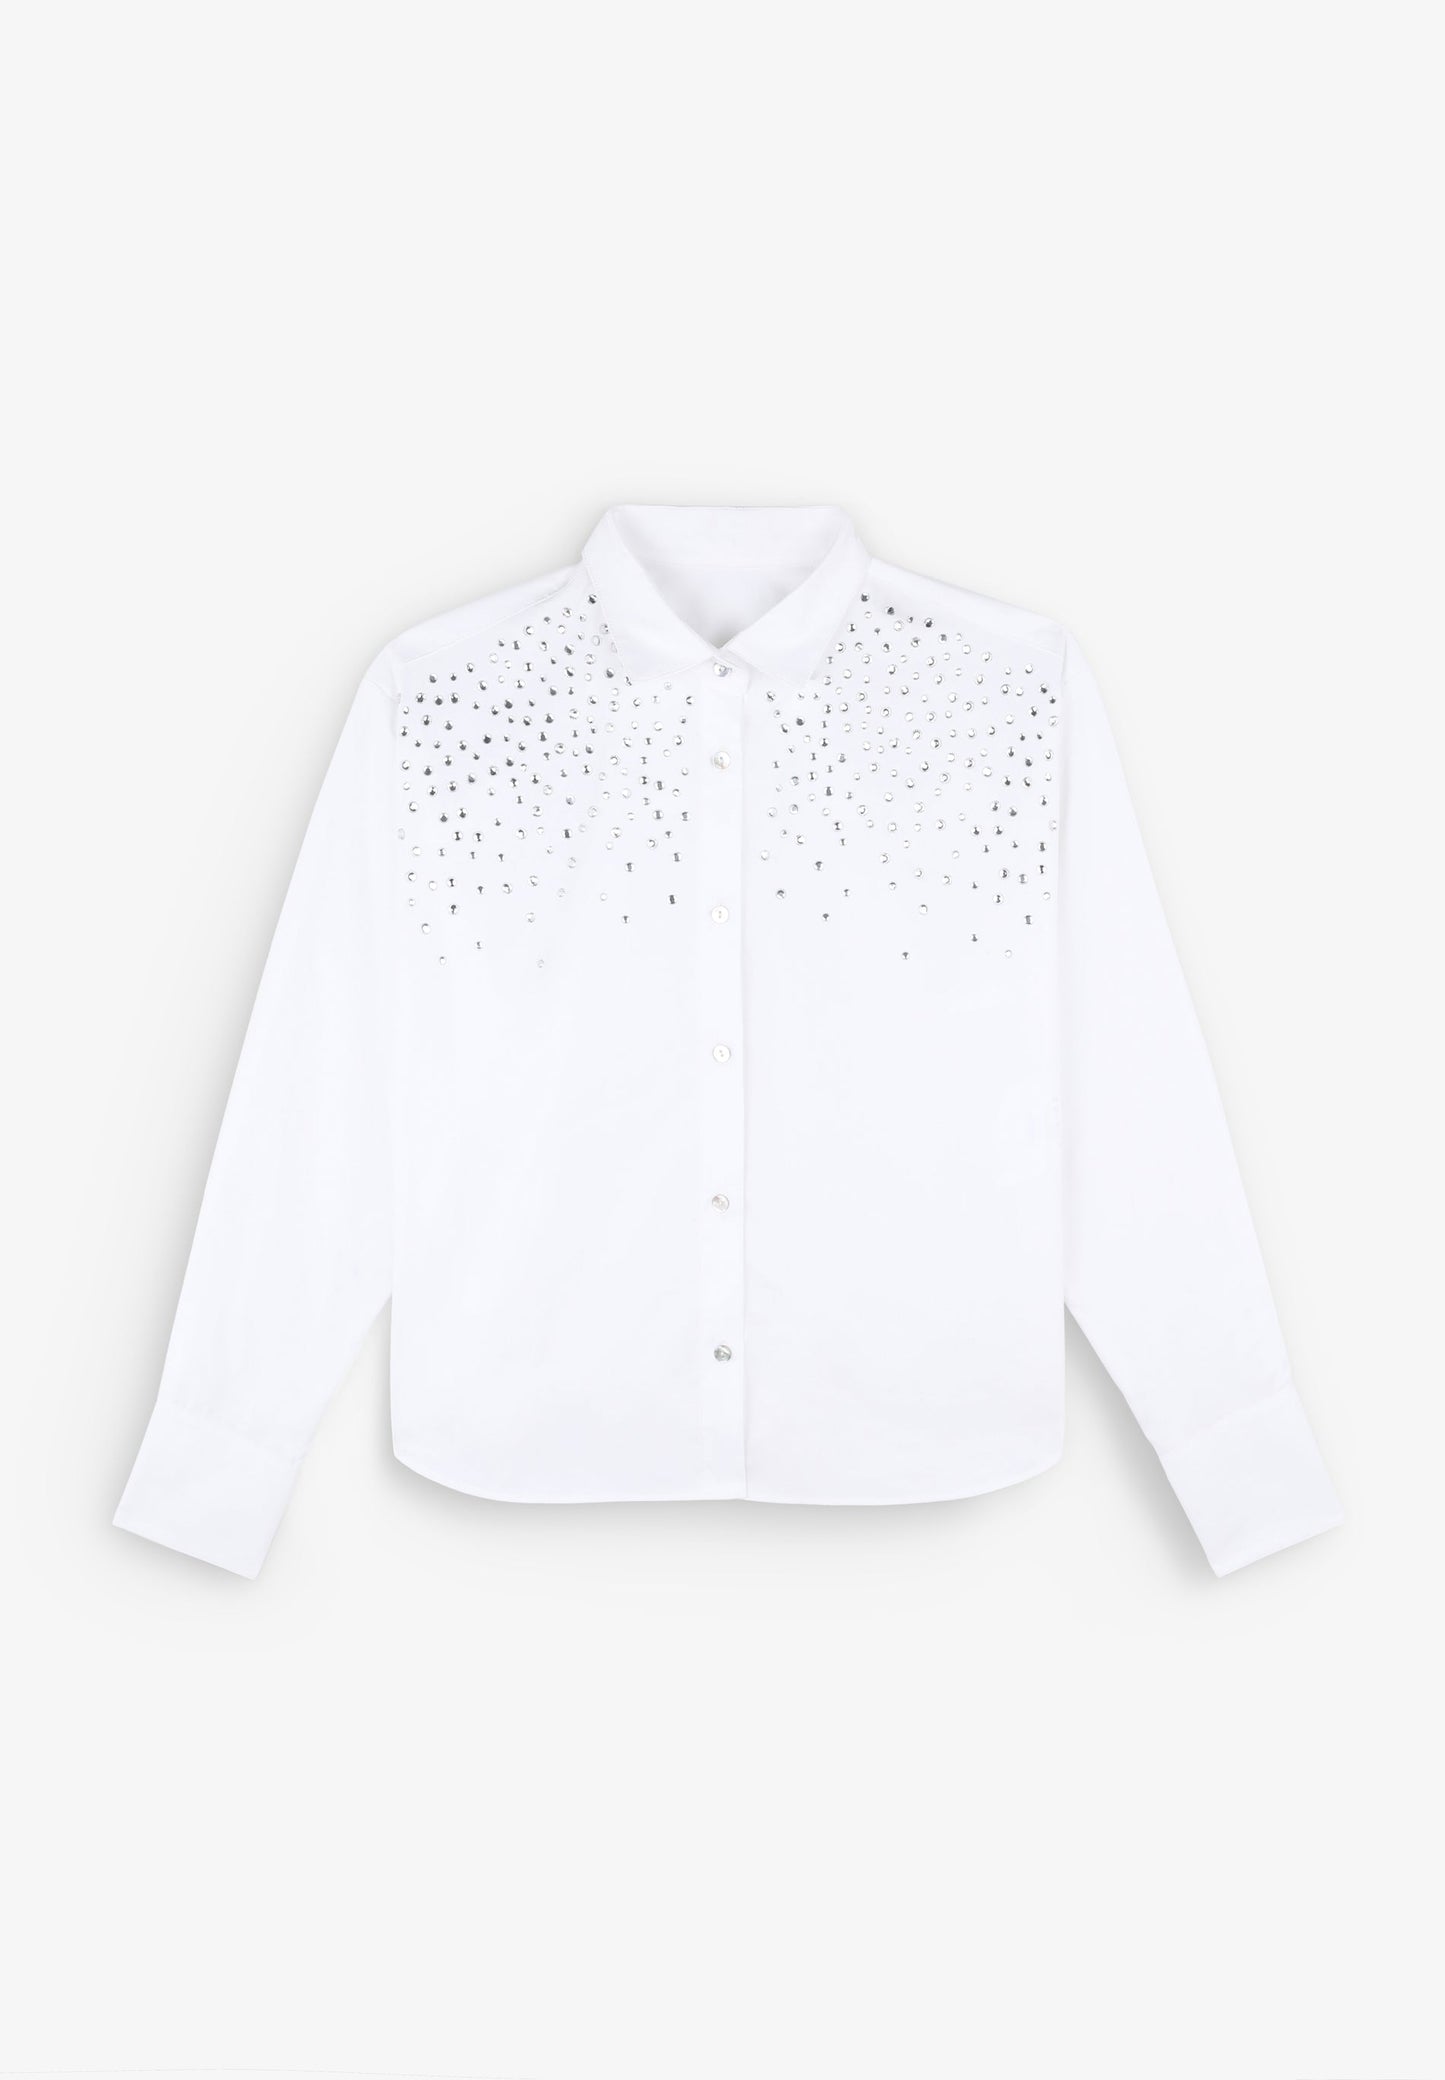 SHIRT WITH BEAD DETAIL